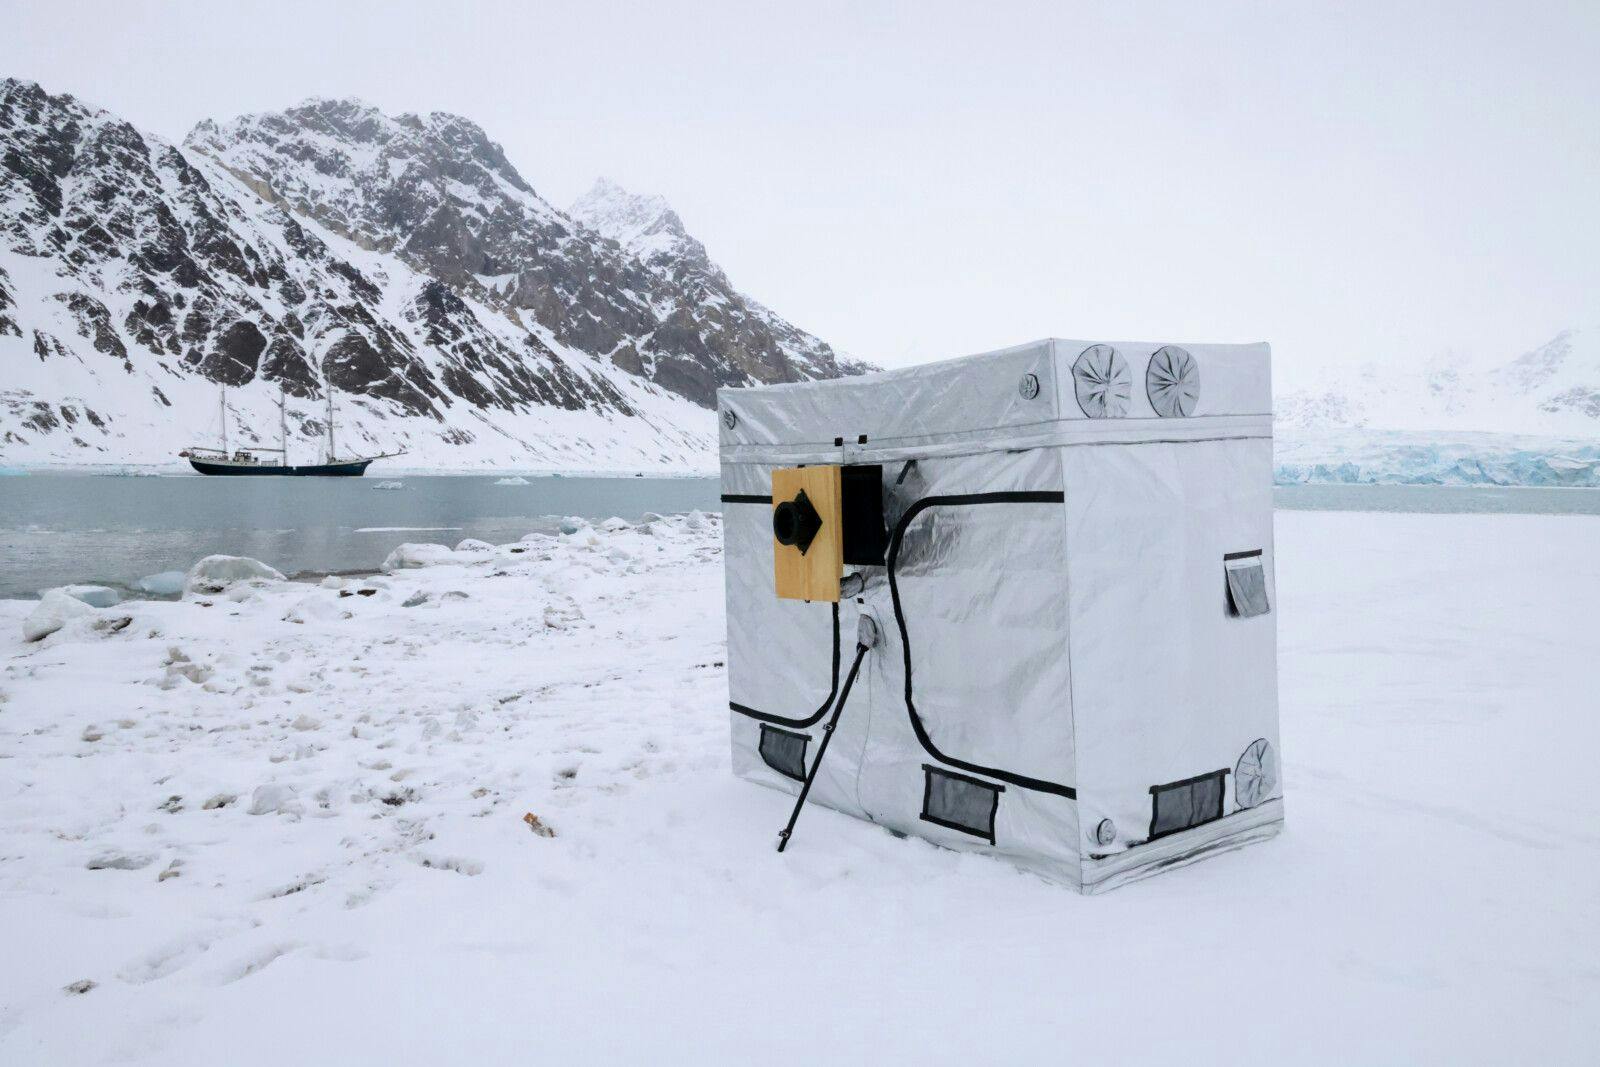 Tristan Duke, Glacial Camera fitted with Ice lens, 2022